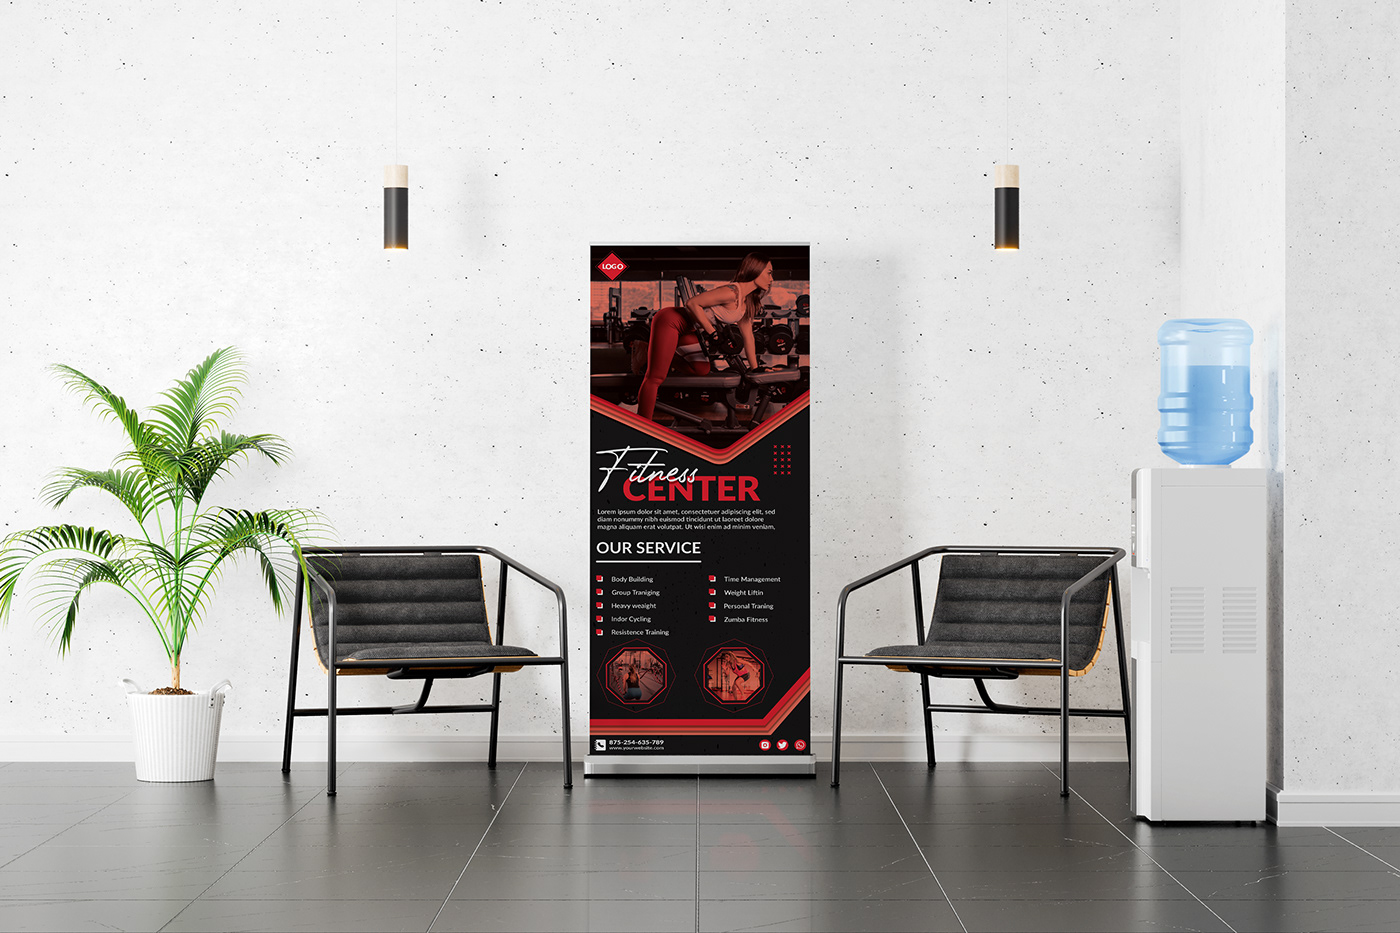 rollup rollup banner Advertising  adds Modern Design creative corporate marketing   Promotional rollup banner design